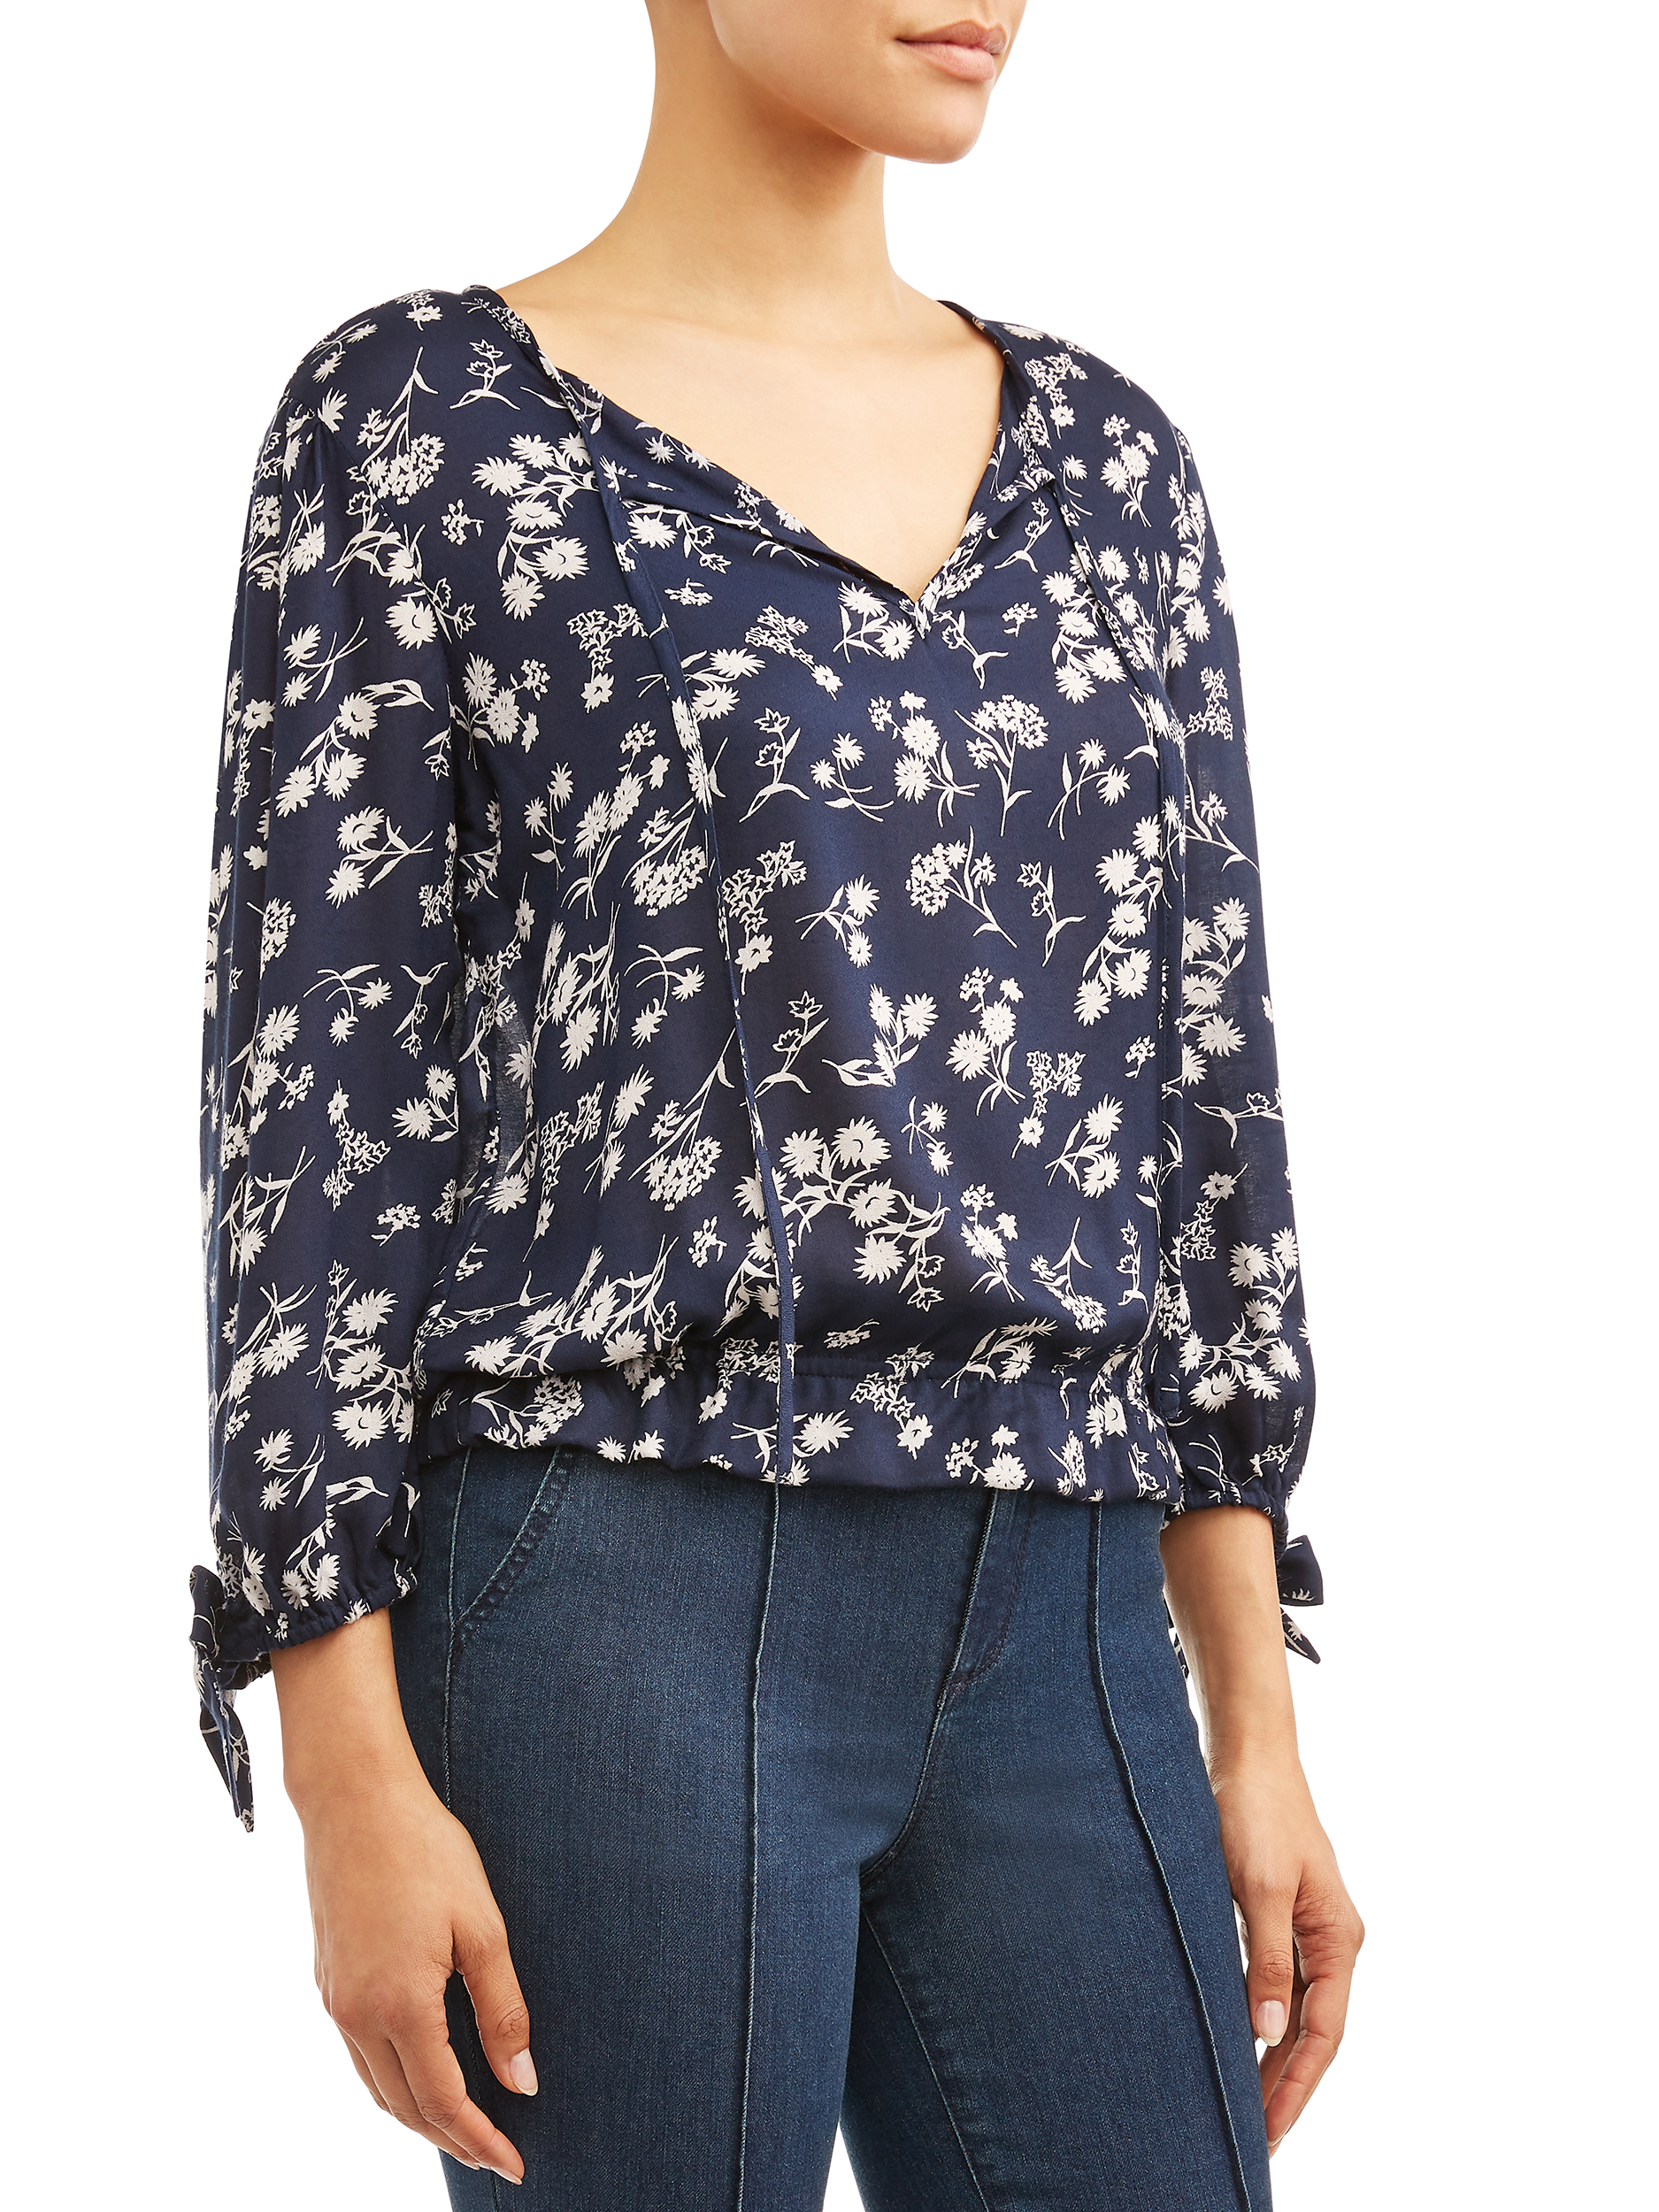 Sofia Jeans 3/4 Length Sleeve Woven Peasant Blouse Women's (Floral Print) - image 5 of 9